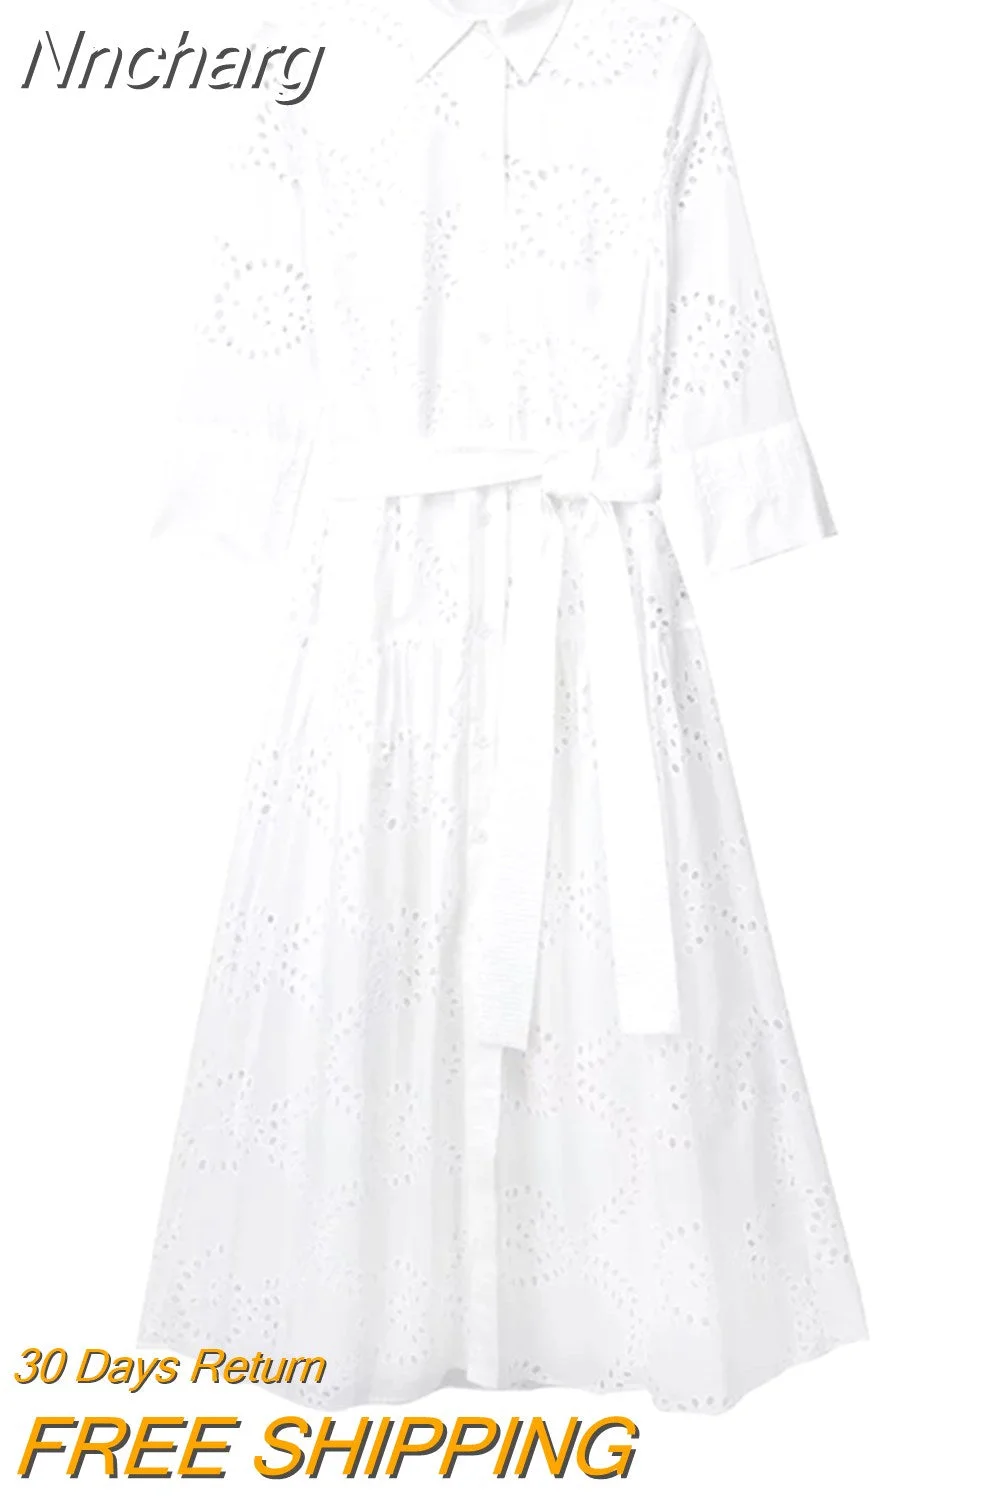 Nncharge TRAF Women 2023 Chic Fashion With Belt Button-up Midi Shirt Dress Vintage Long Sleeve White embroidery Female Dress